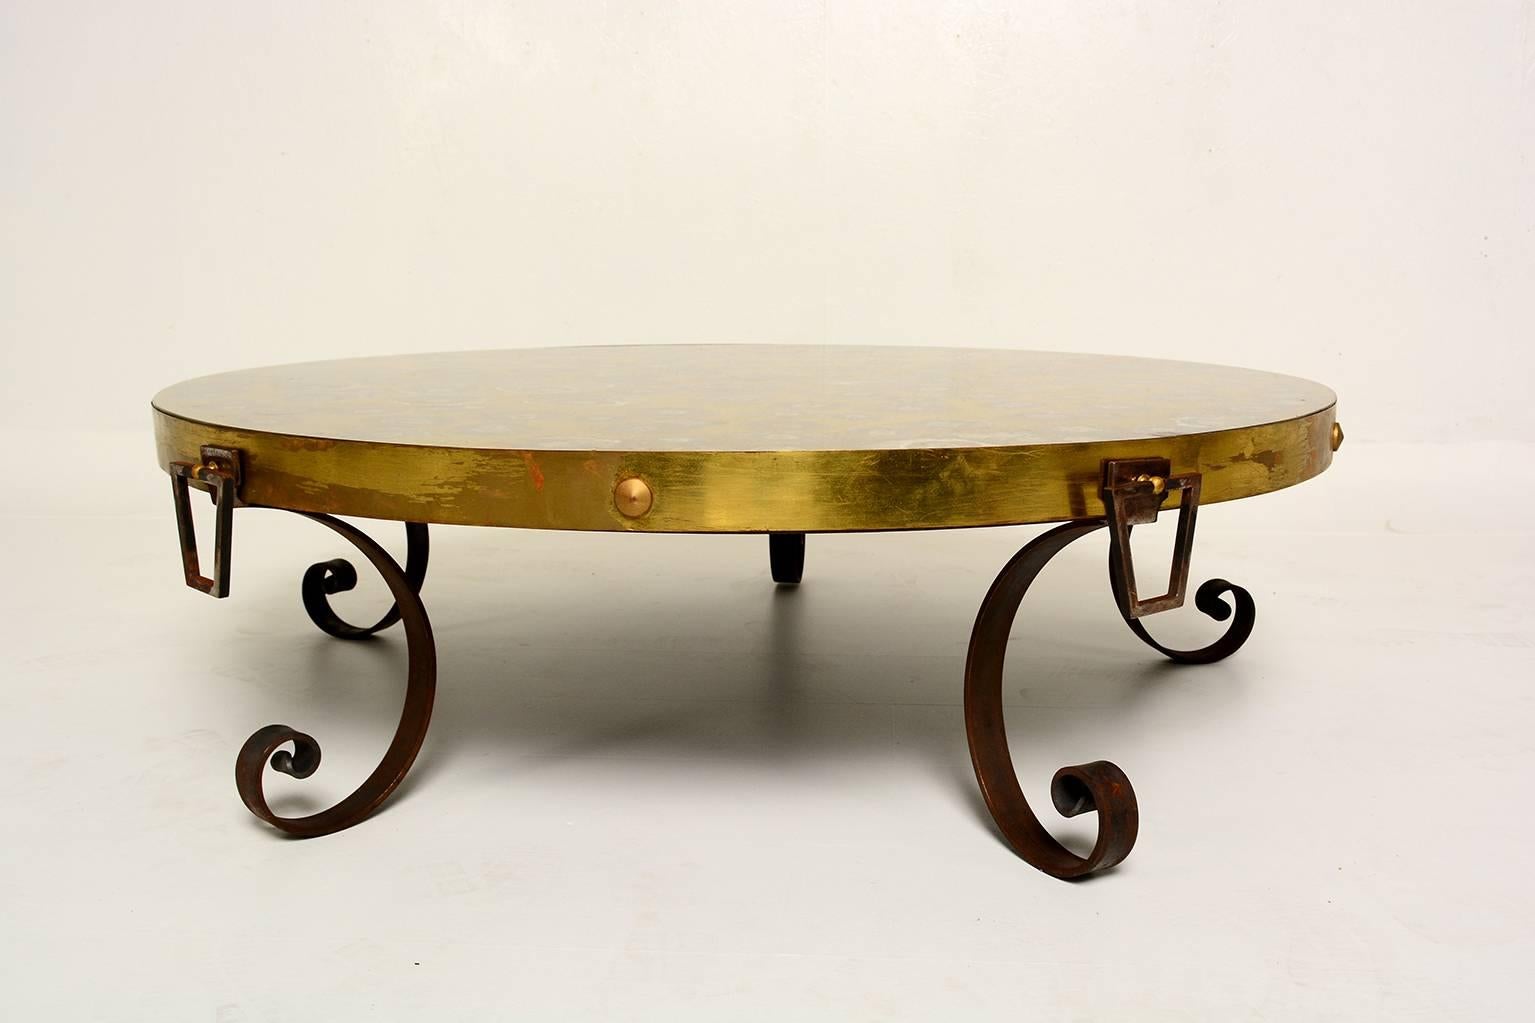 For your consideration a vintage cocktail table with round églomiséd top. 

Forged iron sculptural legs.
 